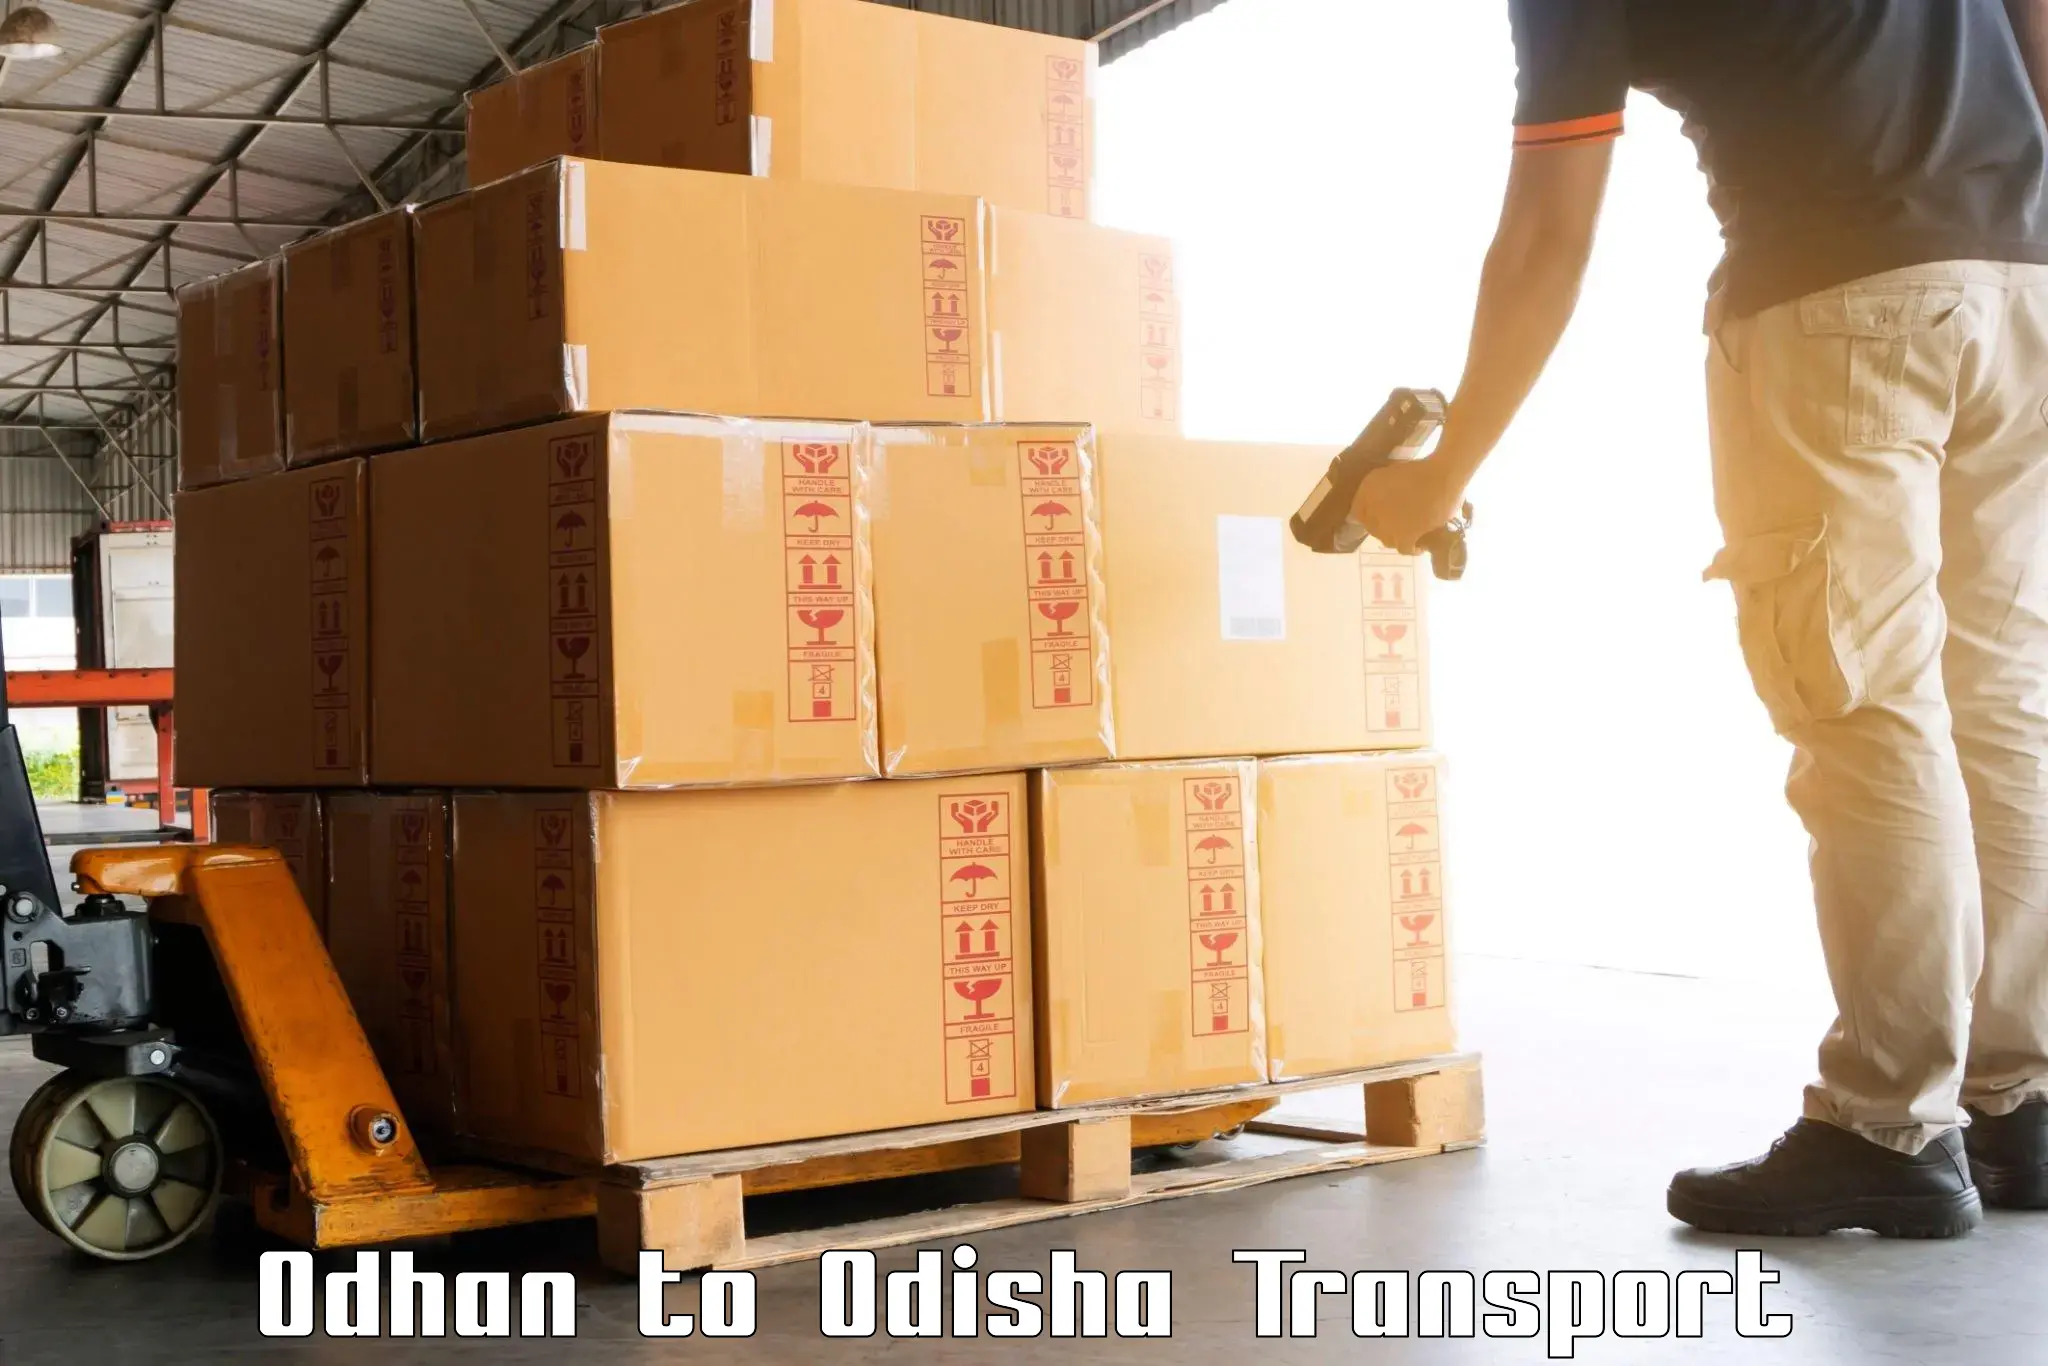 Goods transport services Odhan to Jashipur